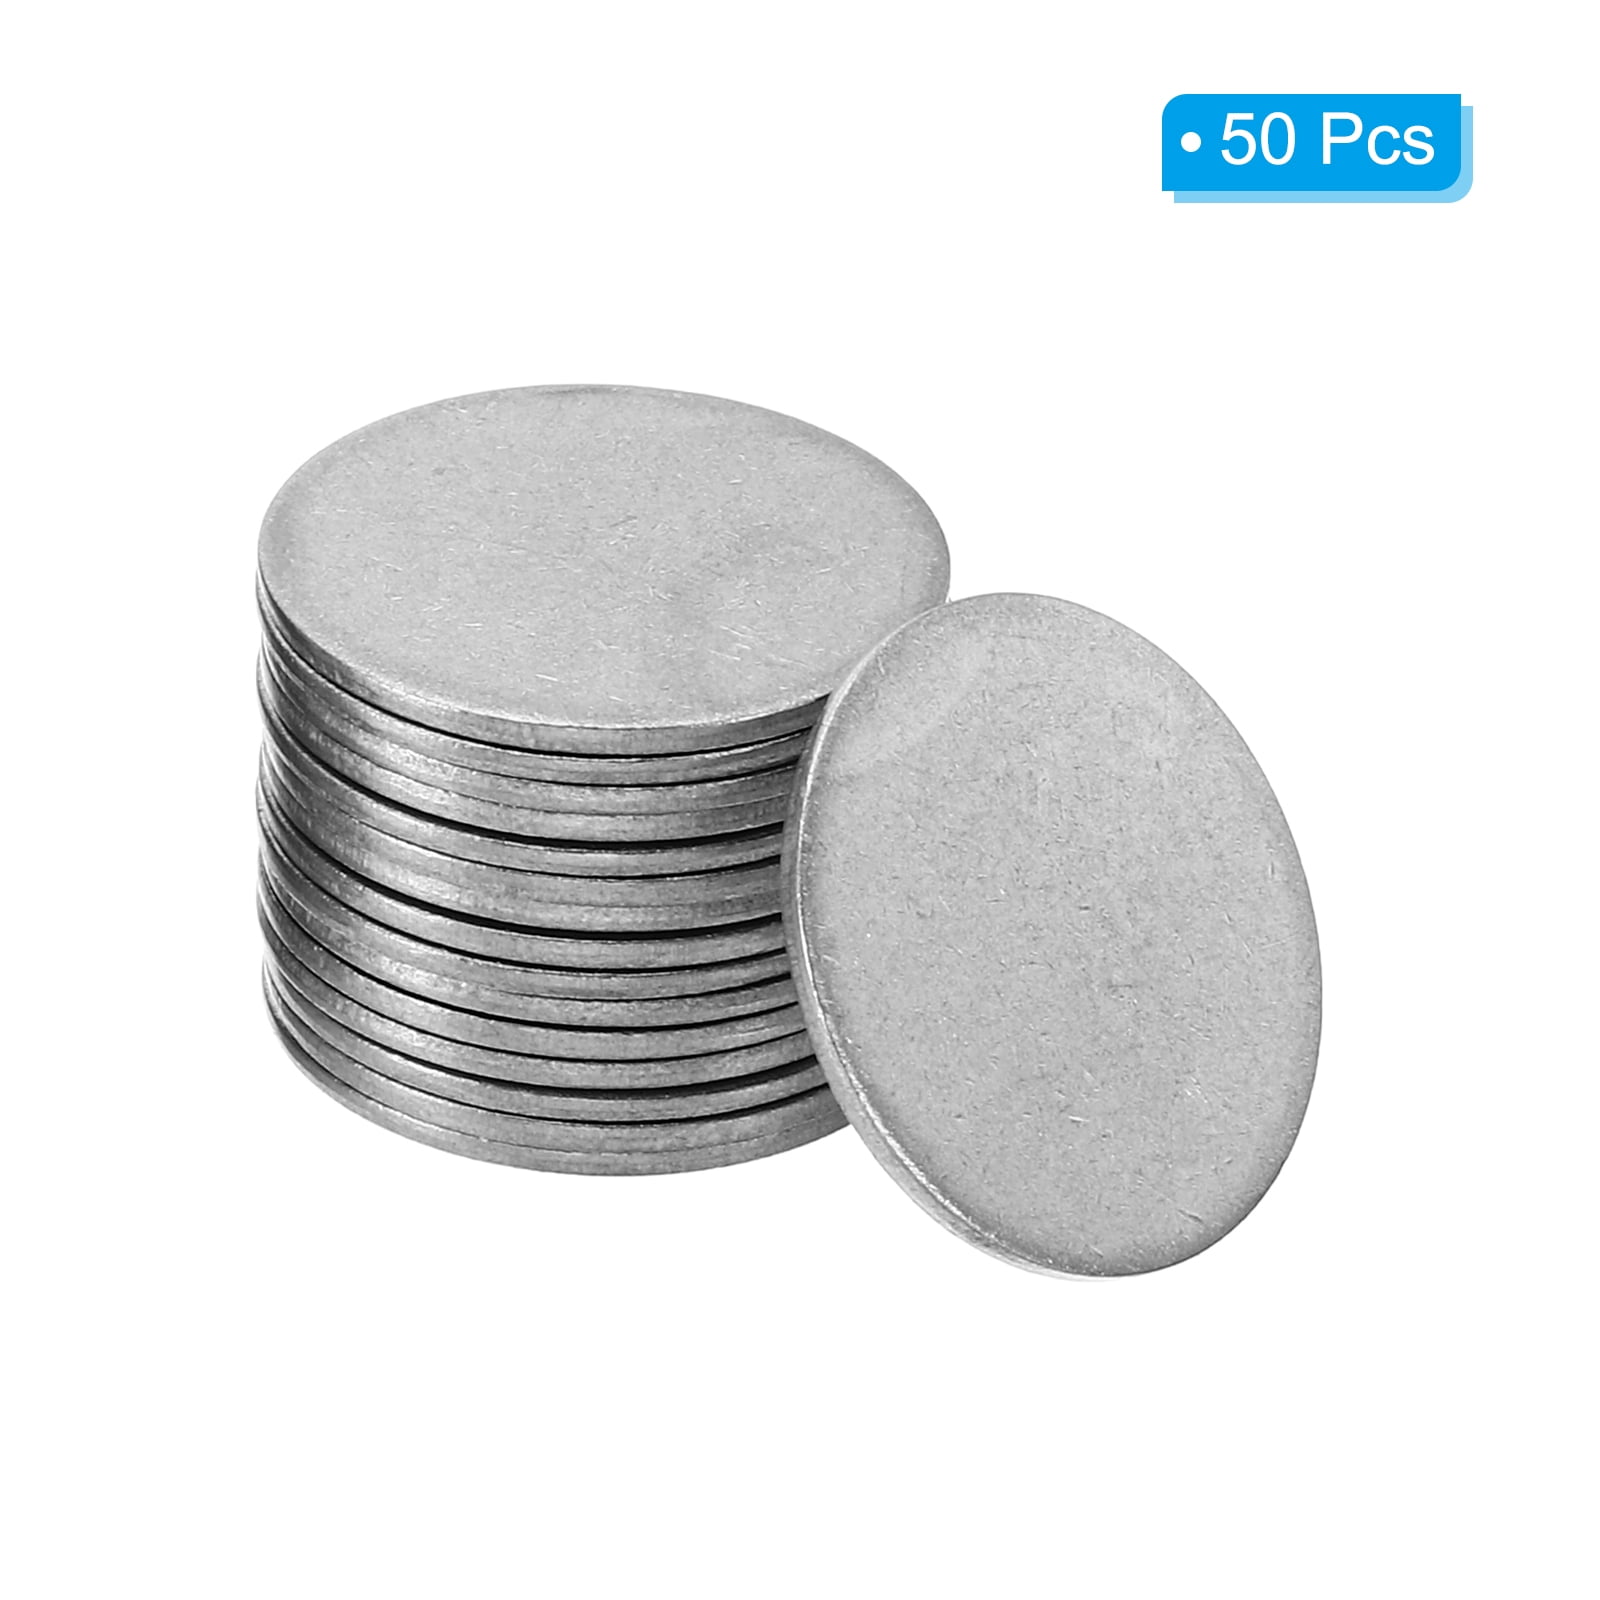 Uxcell 50mm Steel Disc, 10pcs Round Metal Stamping Blanks Tags